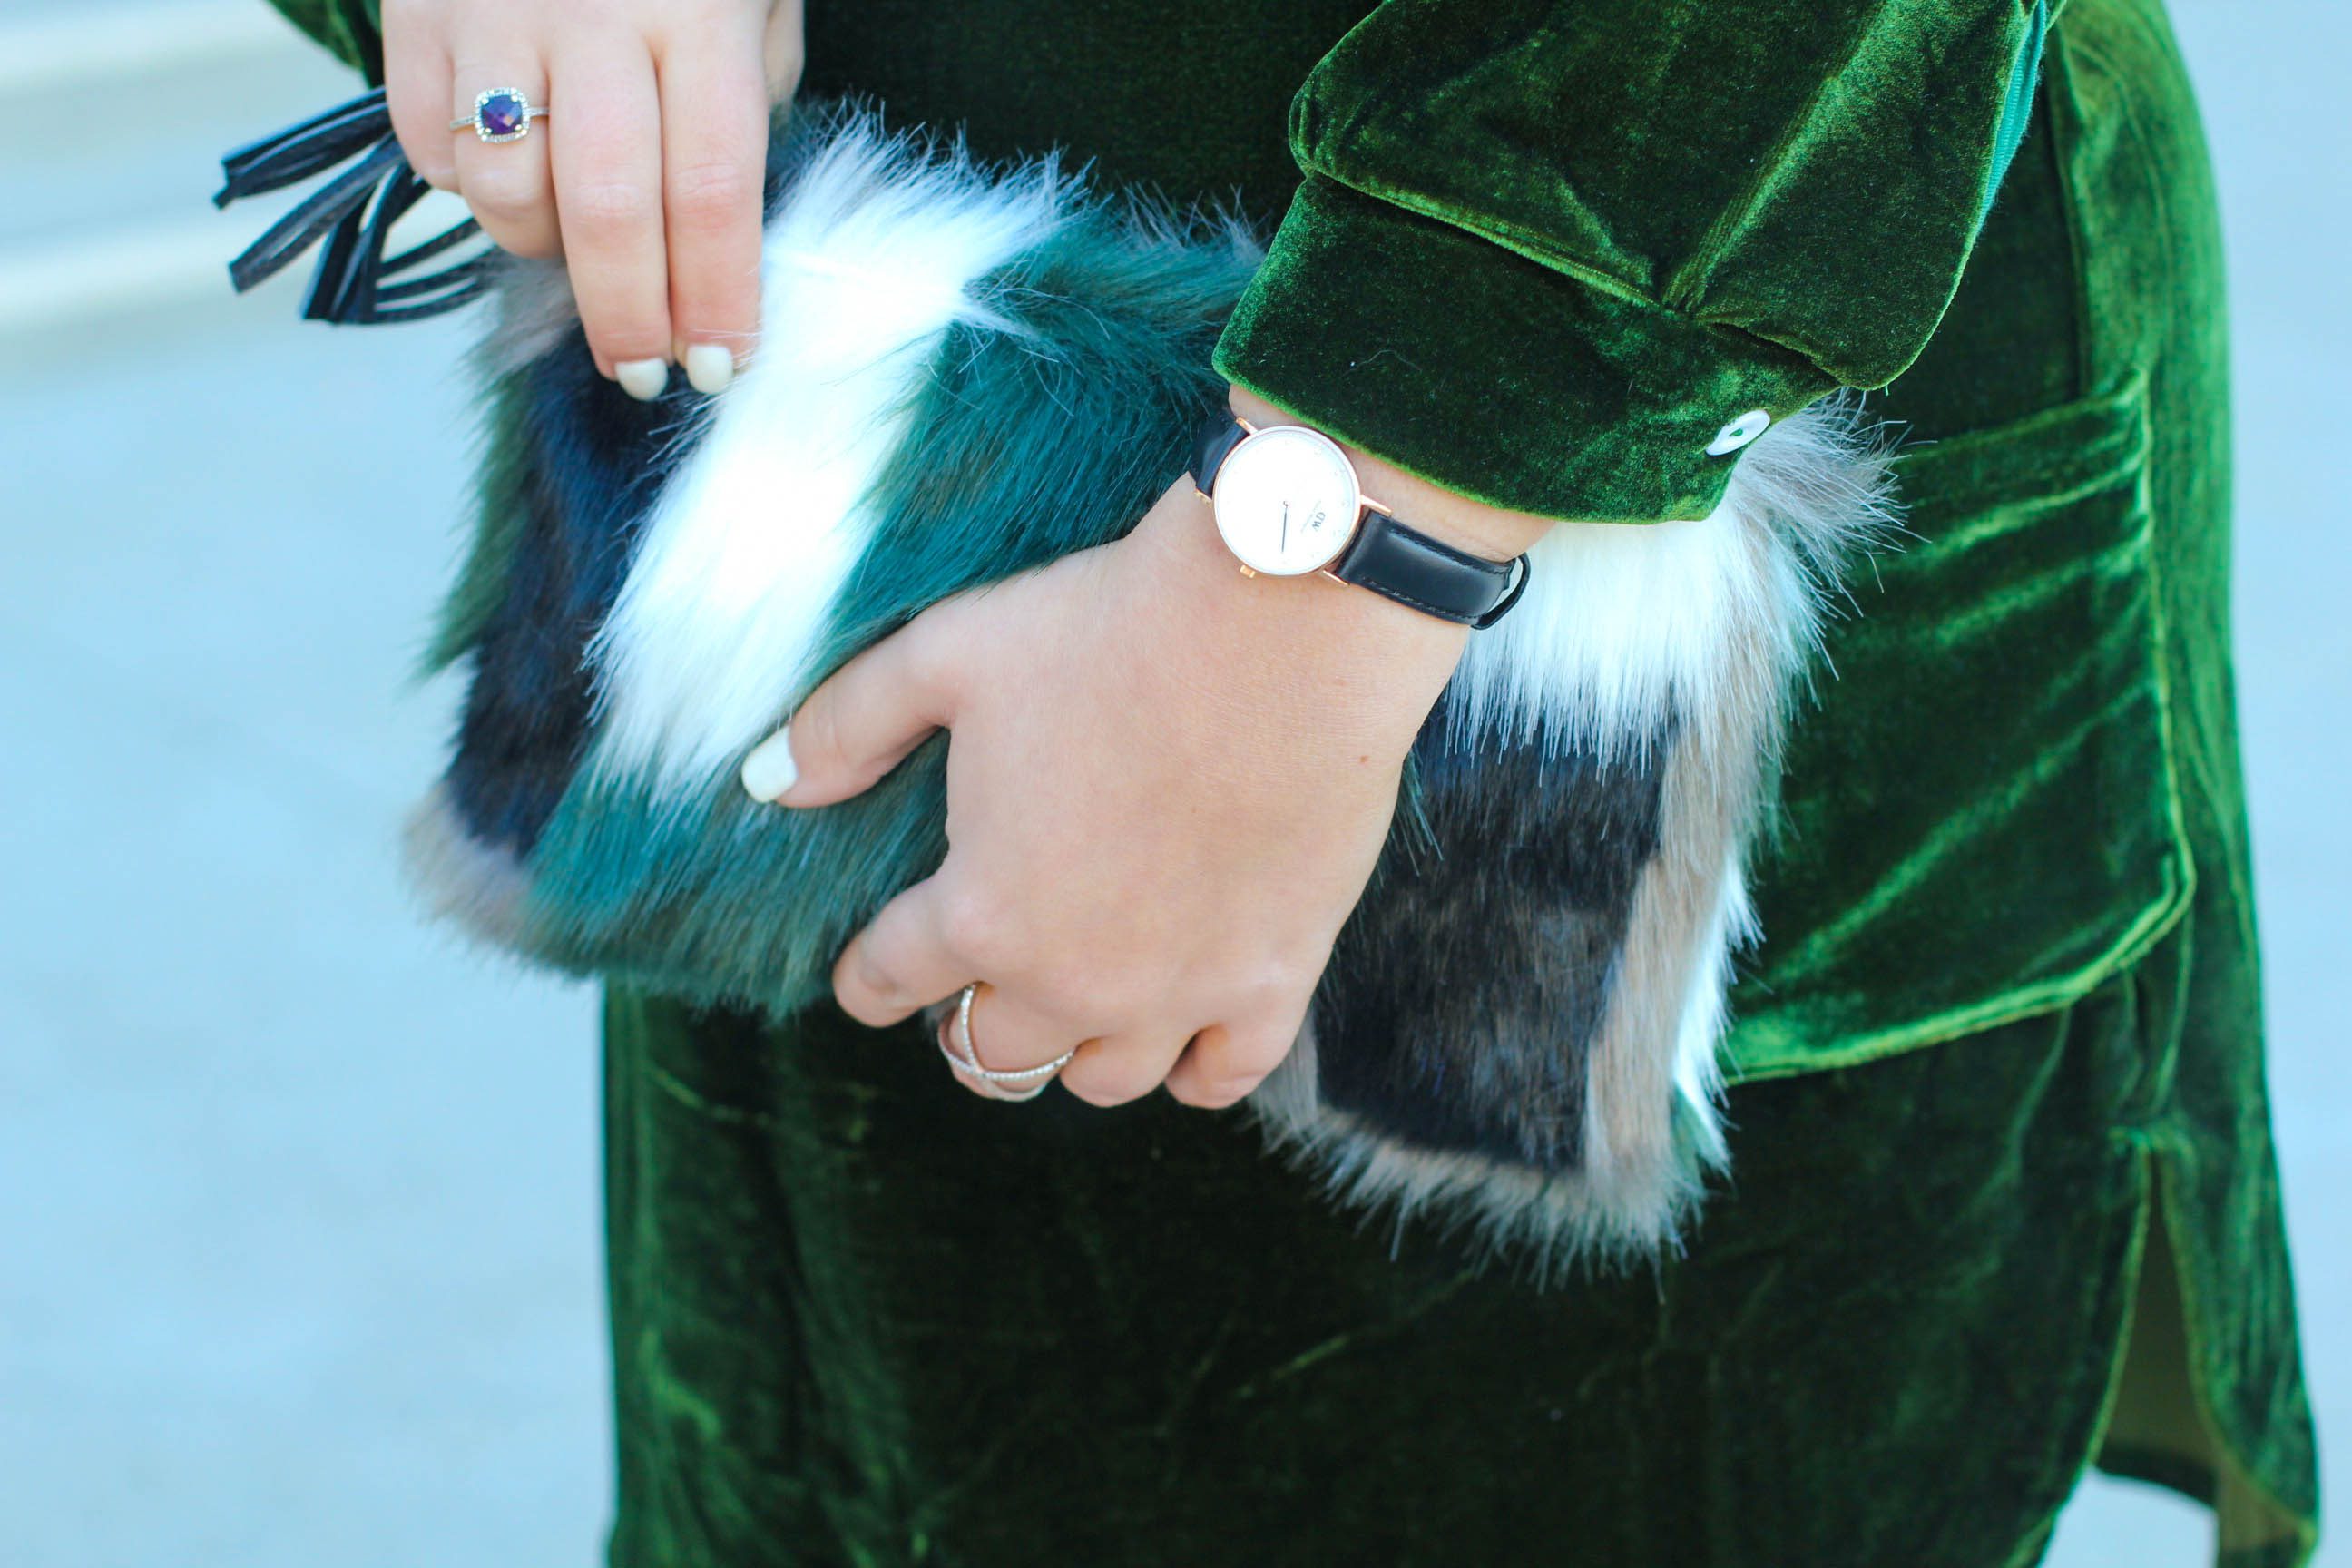 missyonmadison, MissyOnMadisonInstagram, melissa tierney, holiday style, velvet dress, zaful, green velvet dress, faux fur heels, furry heels, furry clutch, faux fur clutch, vera bradley, holiday gifting, hair goals, blogger style, outfit inspo, holiday outfit inspo, winter style, christmas style, merry christmas, christmas tree, christmas 2016, pasadena christmas tree, pasadena christmas, la blogger,